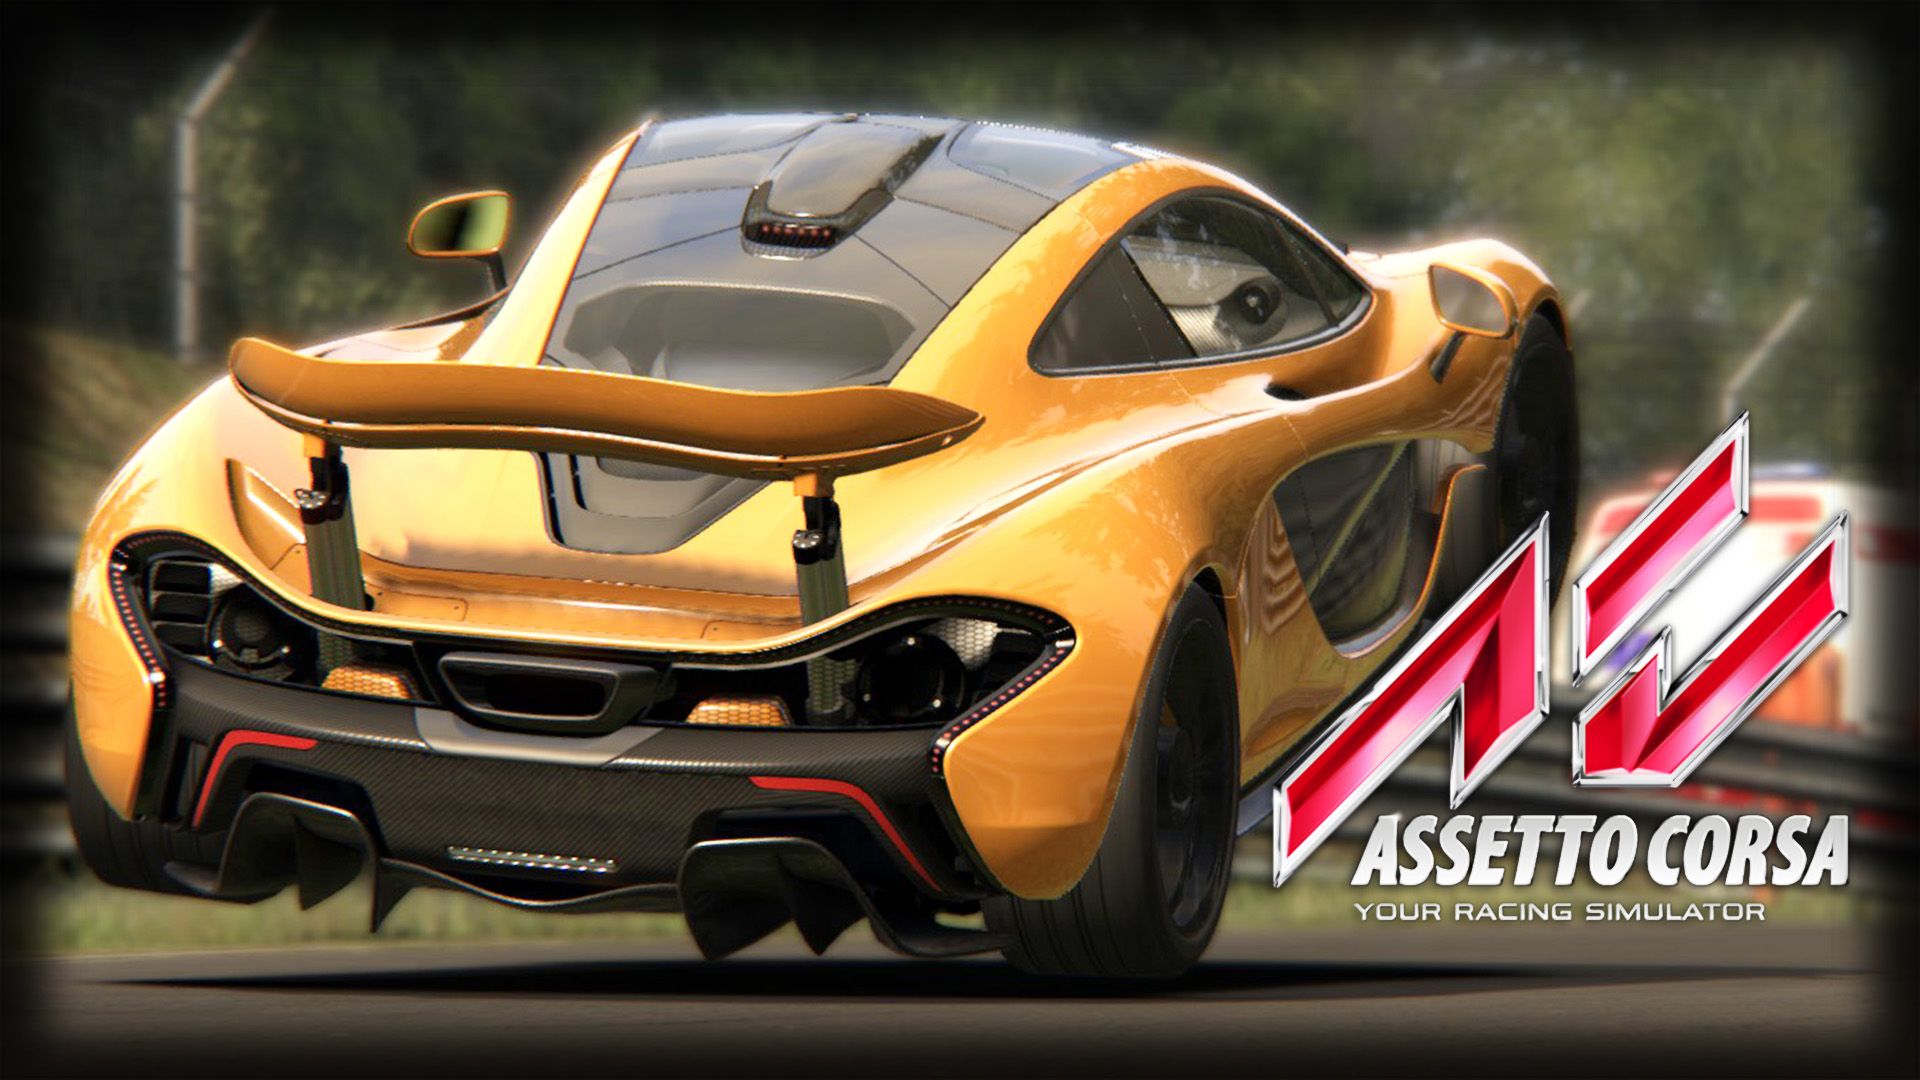 Steam Workshop - Assetto Corsa (AC) Car Collection